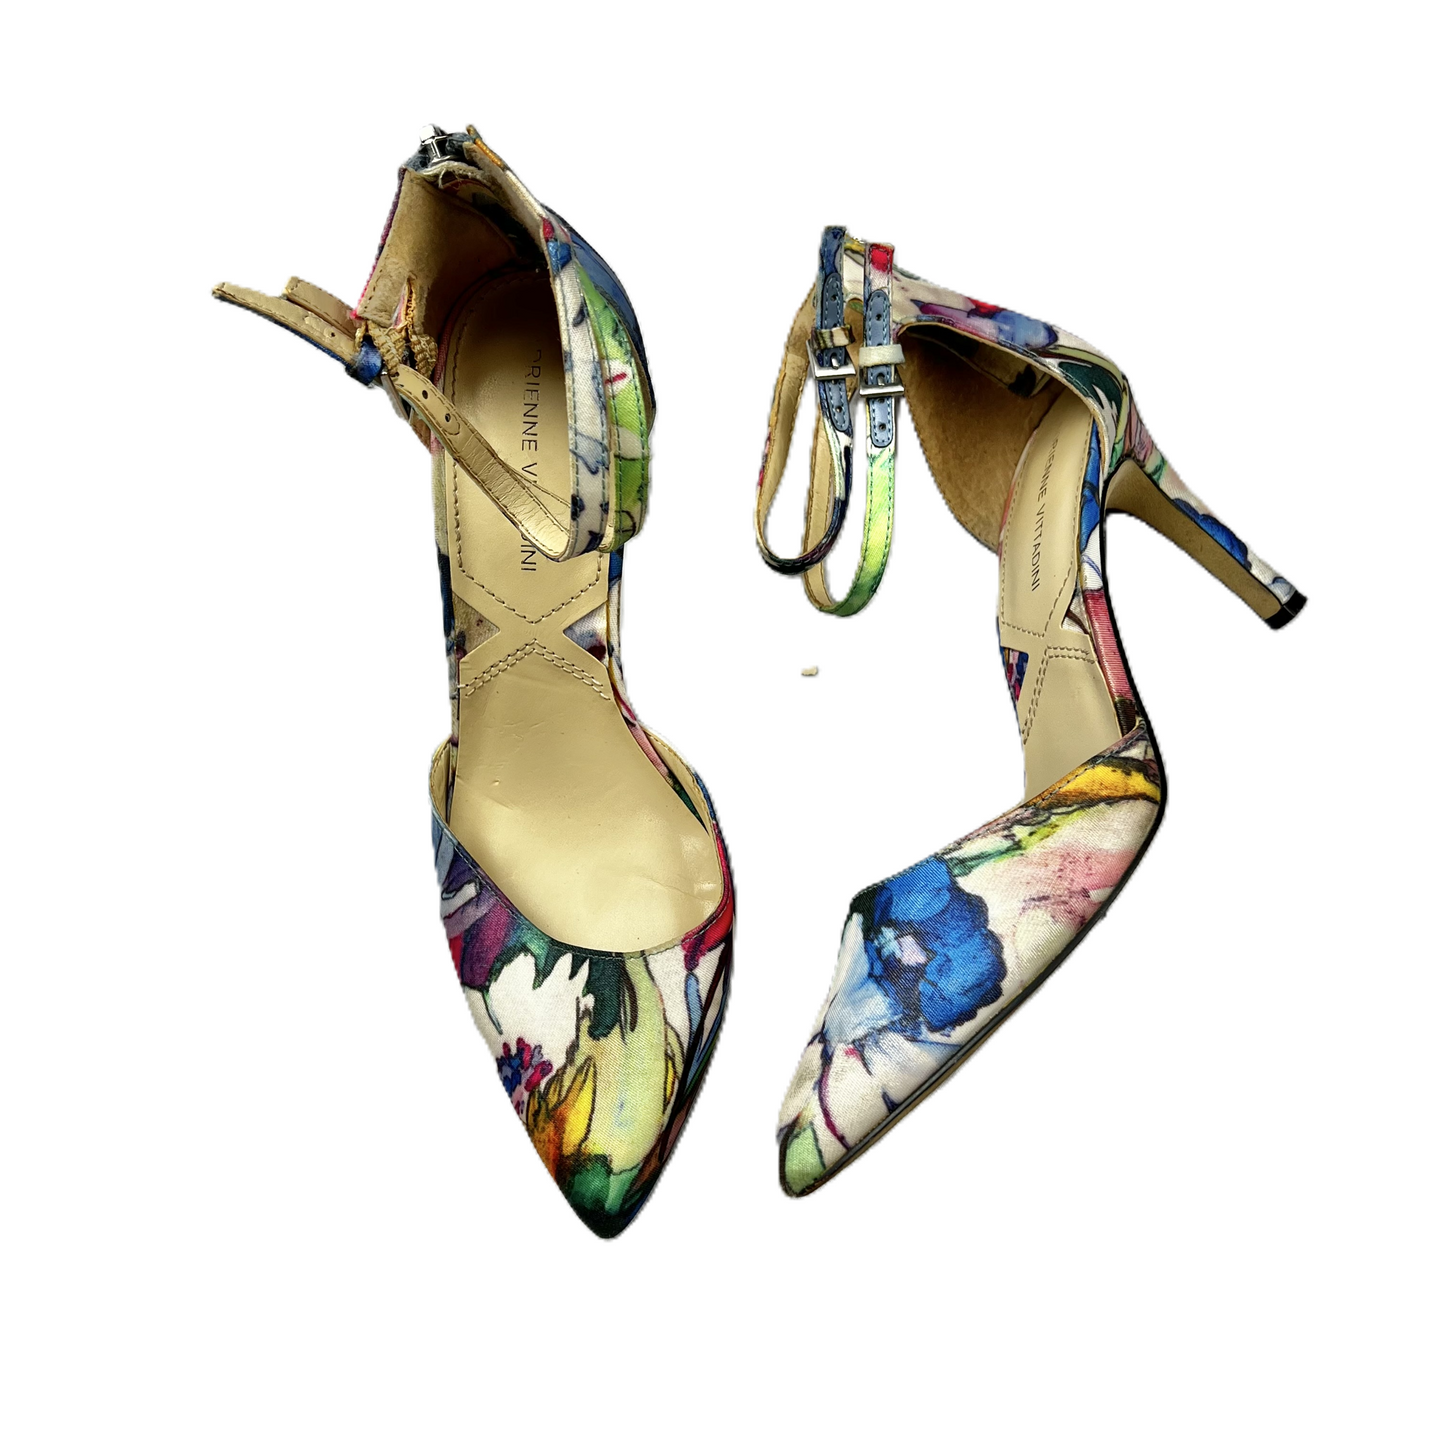 Multi-colored Shoes Heels Stiletto By Adrienne Vittadini, Size: 8